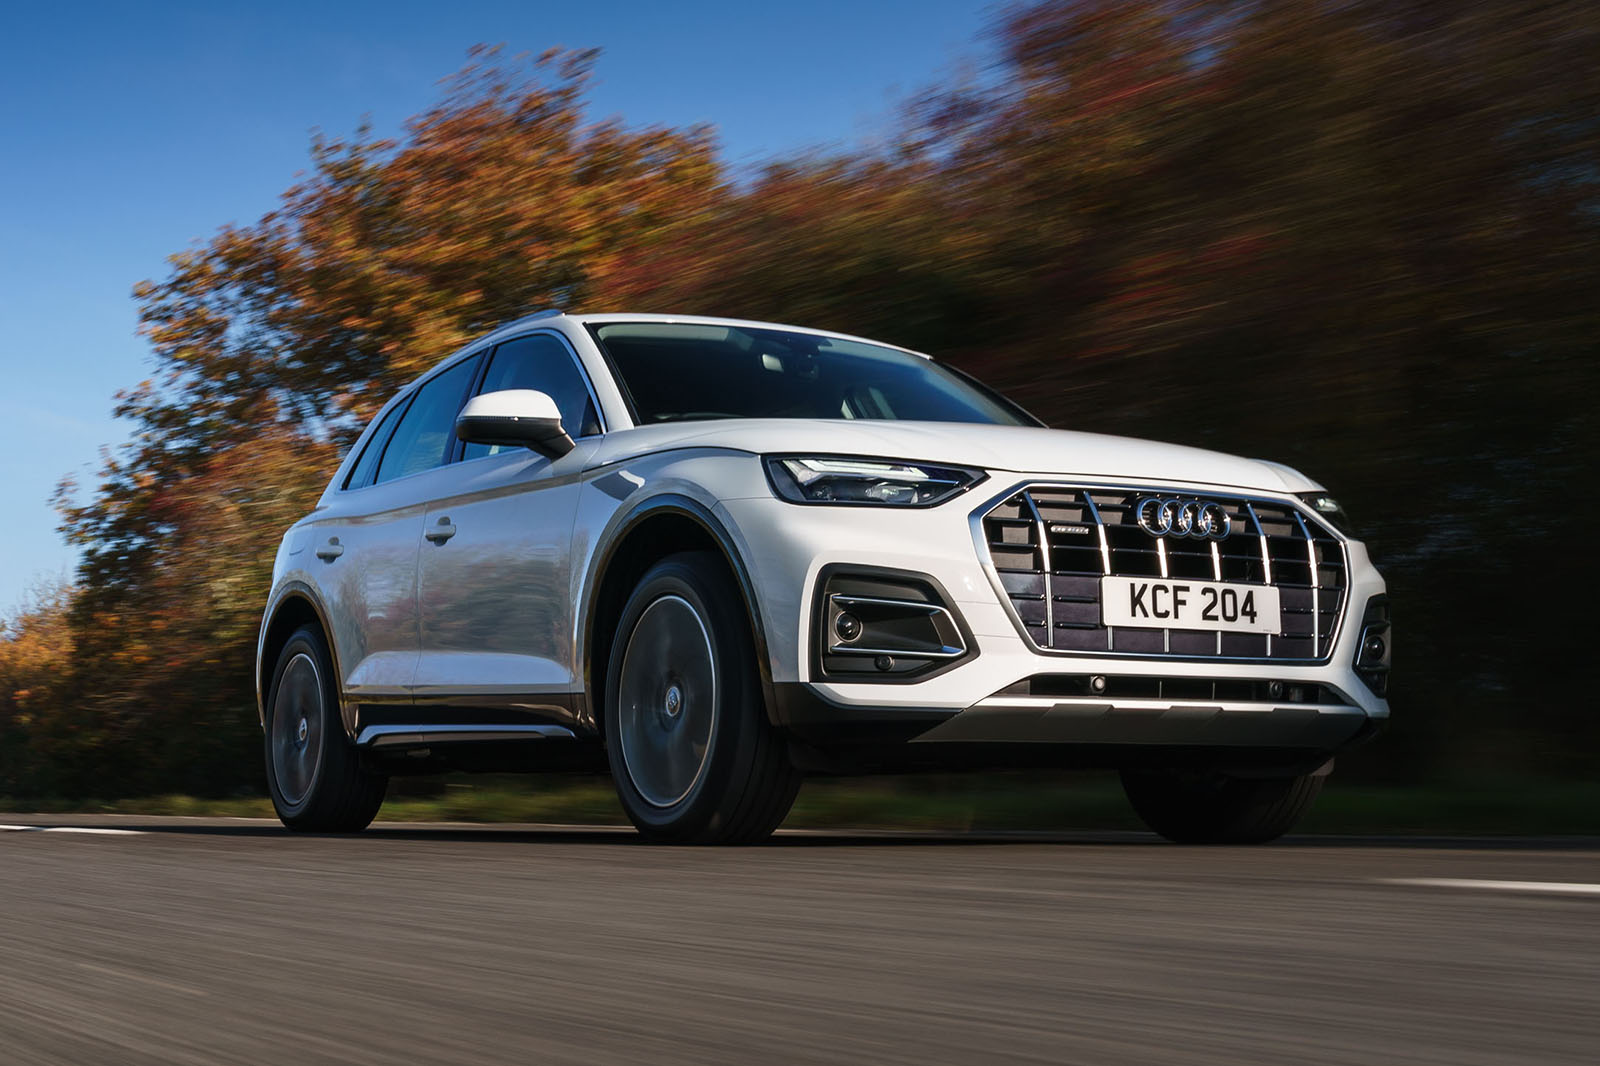 https://www.autocar.co.uk/sites/autocar.co.uk/files/images/car-reviews/first-drives/legacy/1-audi-q5-40-tdi-sport-2020-uk-first-drive-review-hero-front.jpg